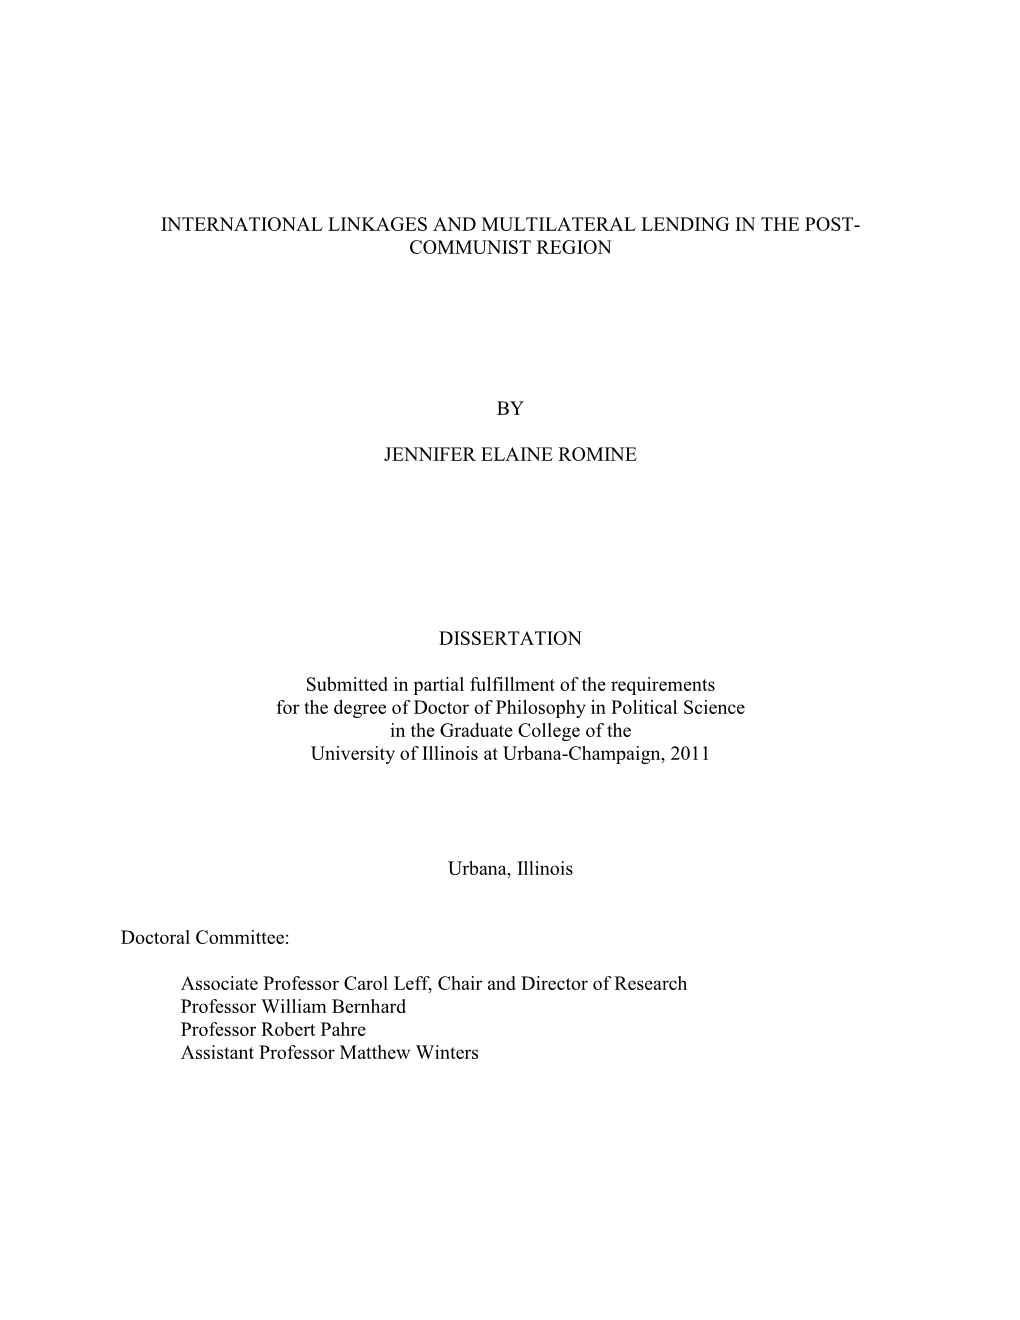 International Linkages and Multilateral Lending in the Post- Communist Region